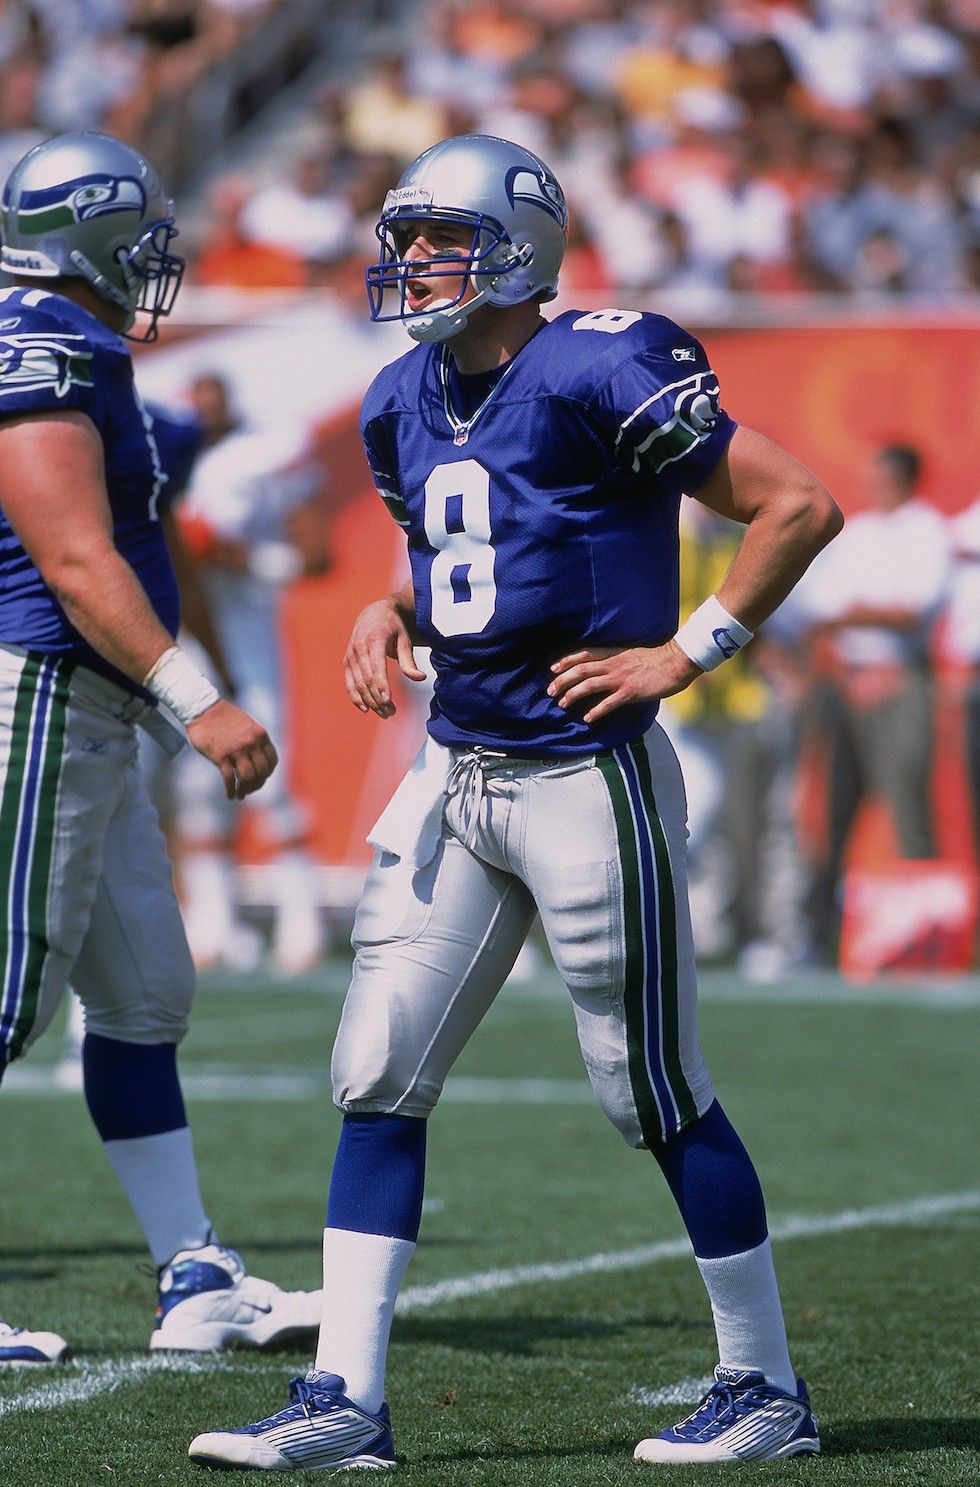 The 20 Best Uniforms in NFL History Made Football Fashionable